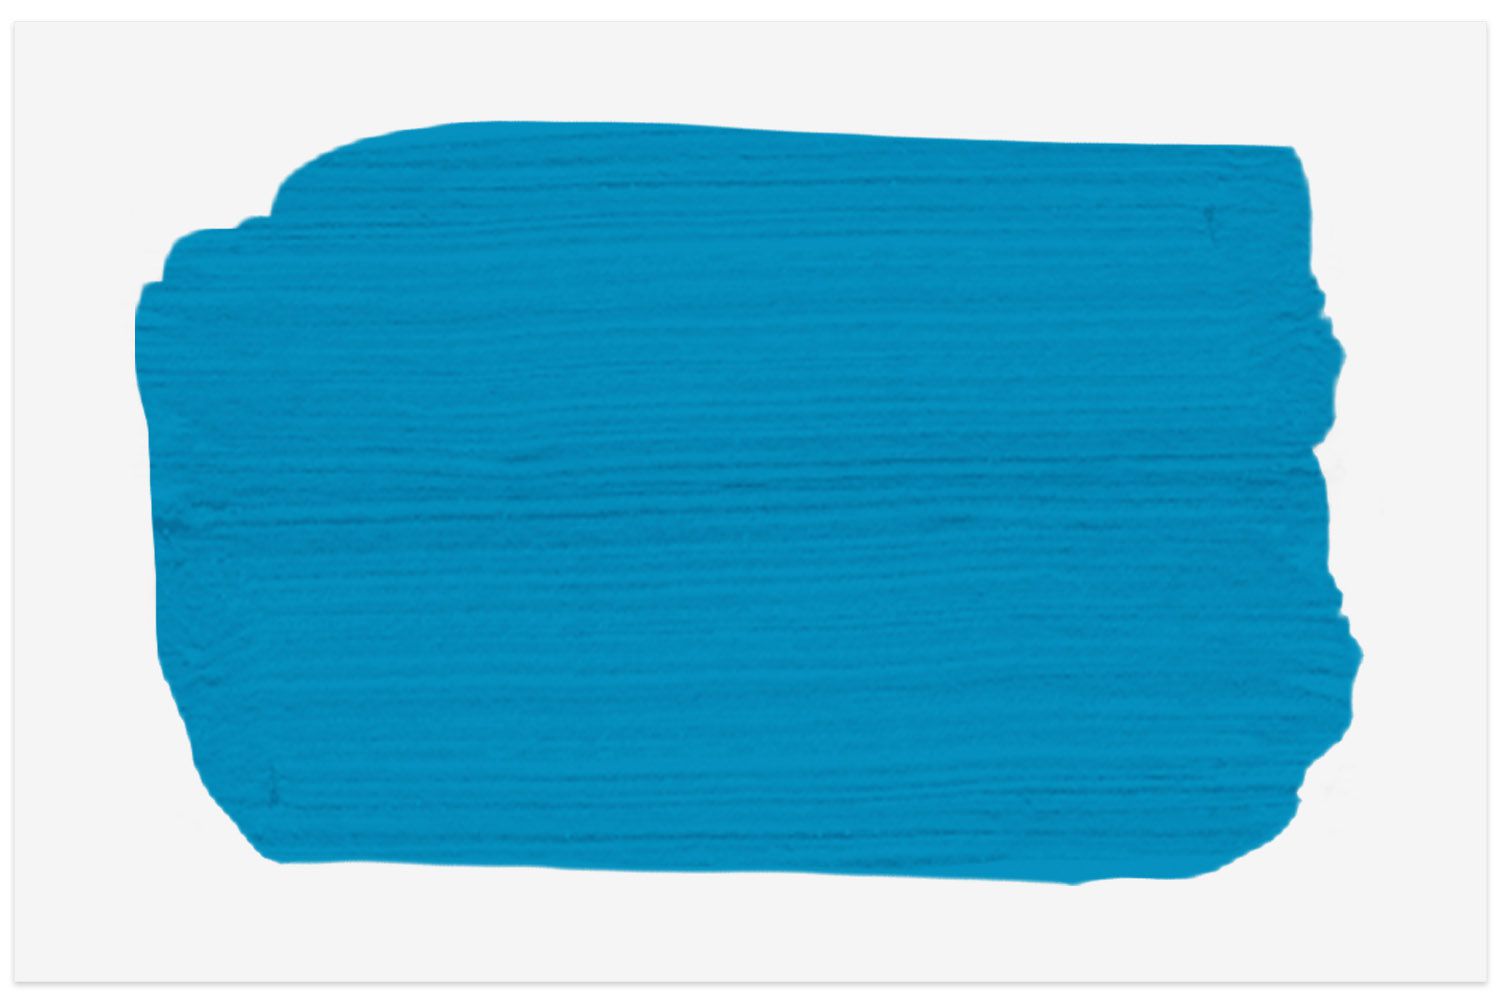 Bellflower paint swatch from PPG Paints